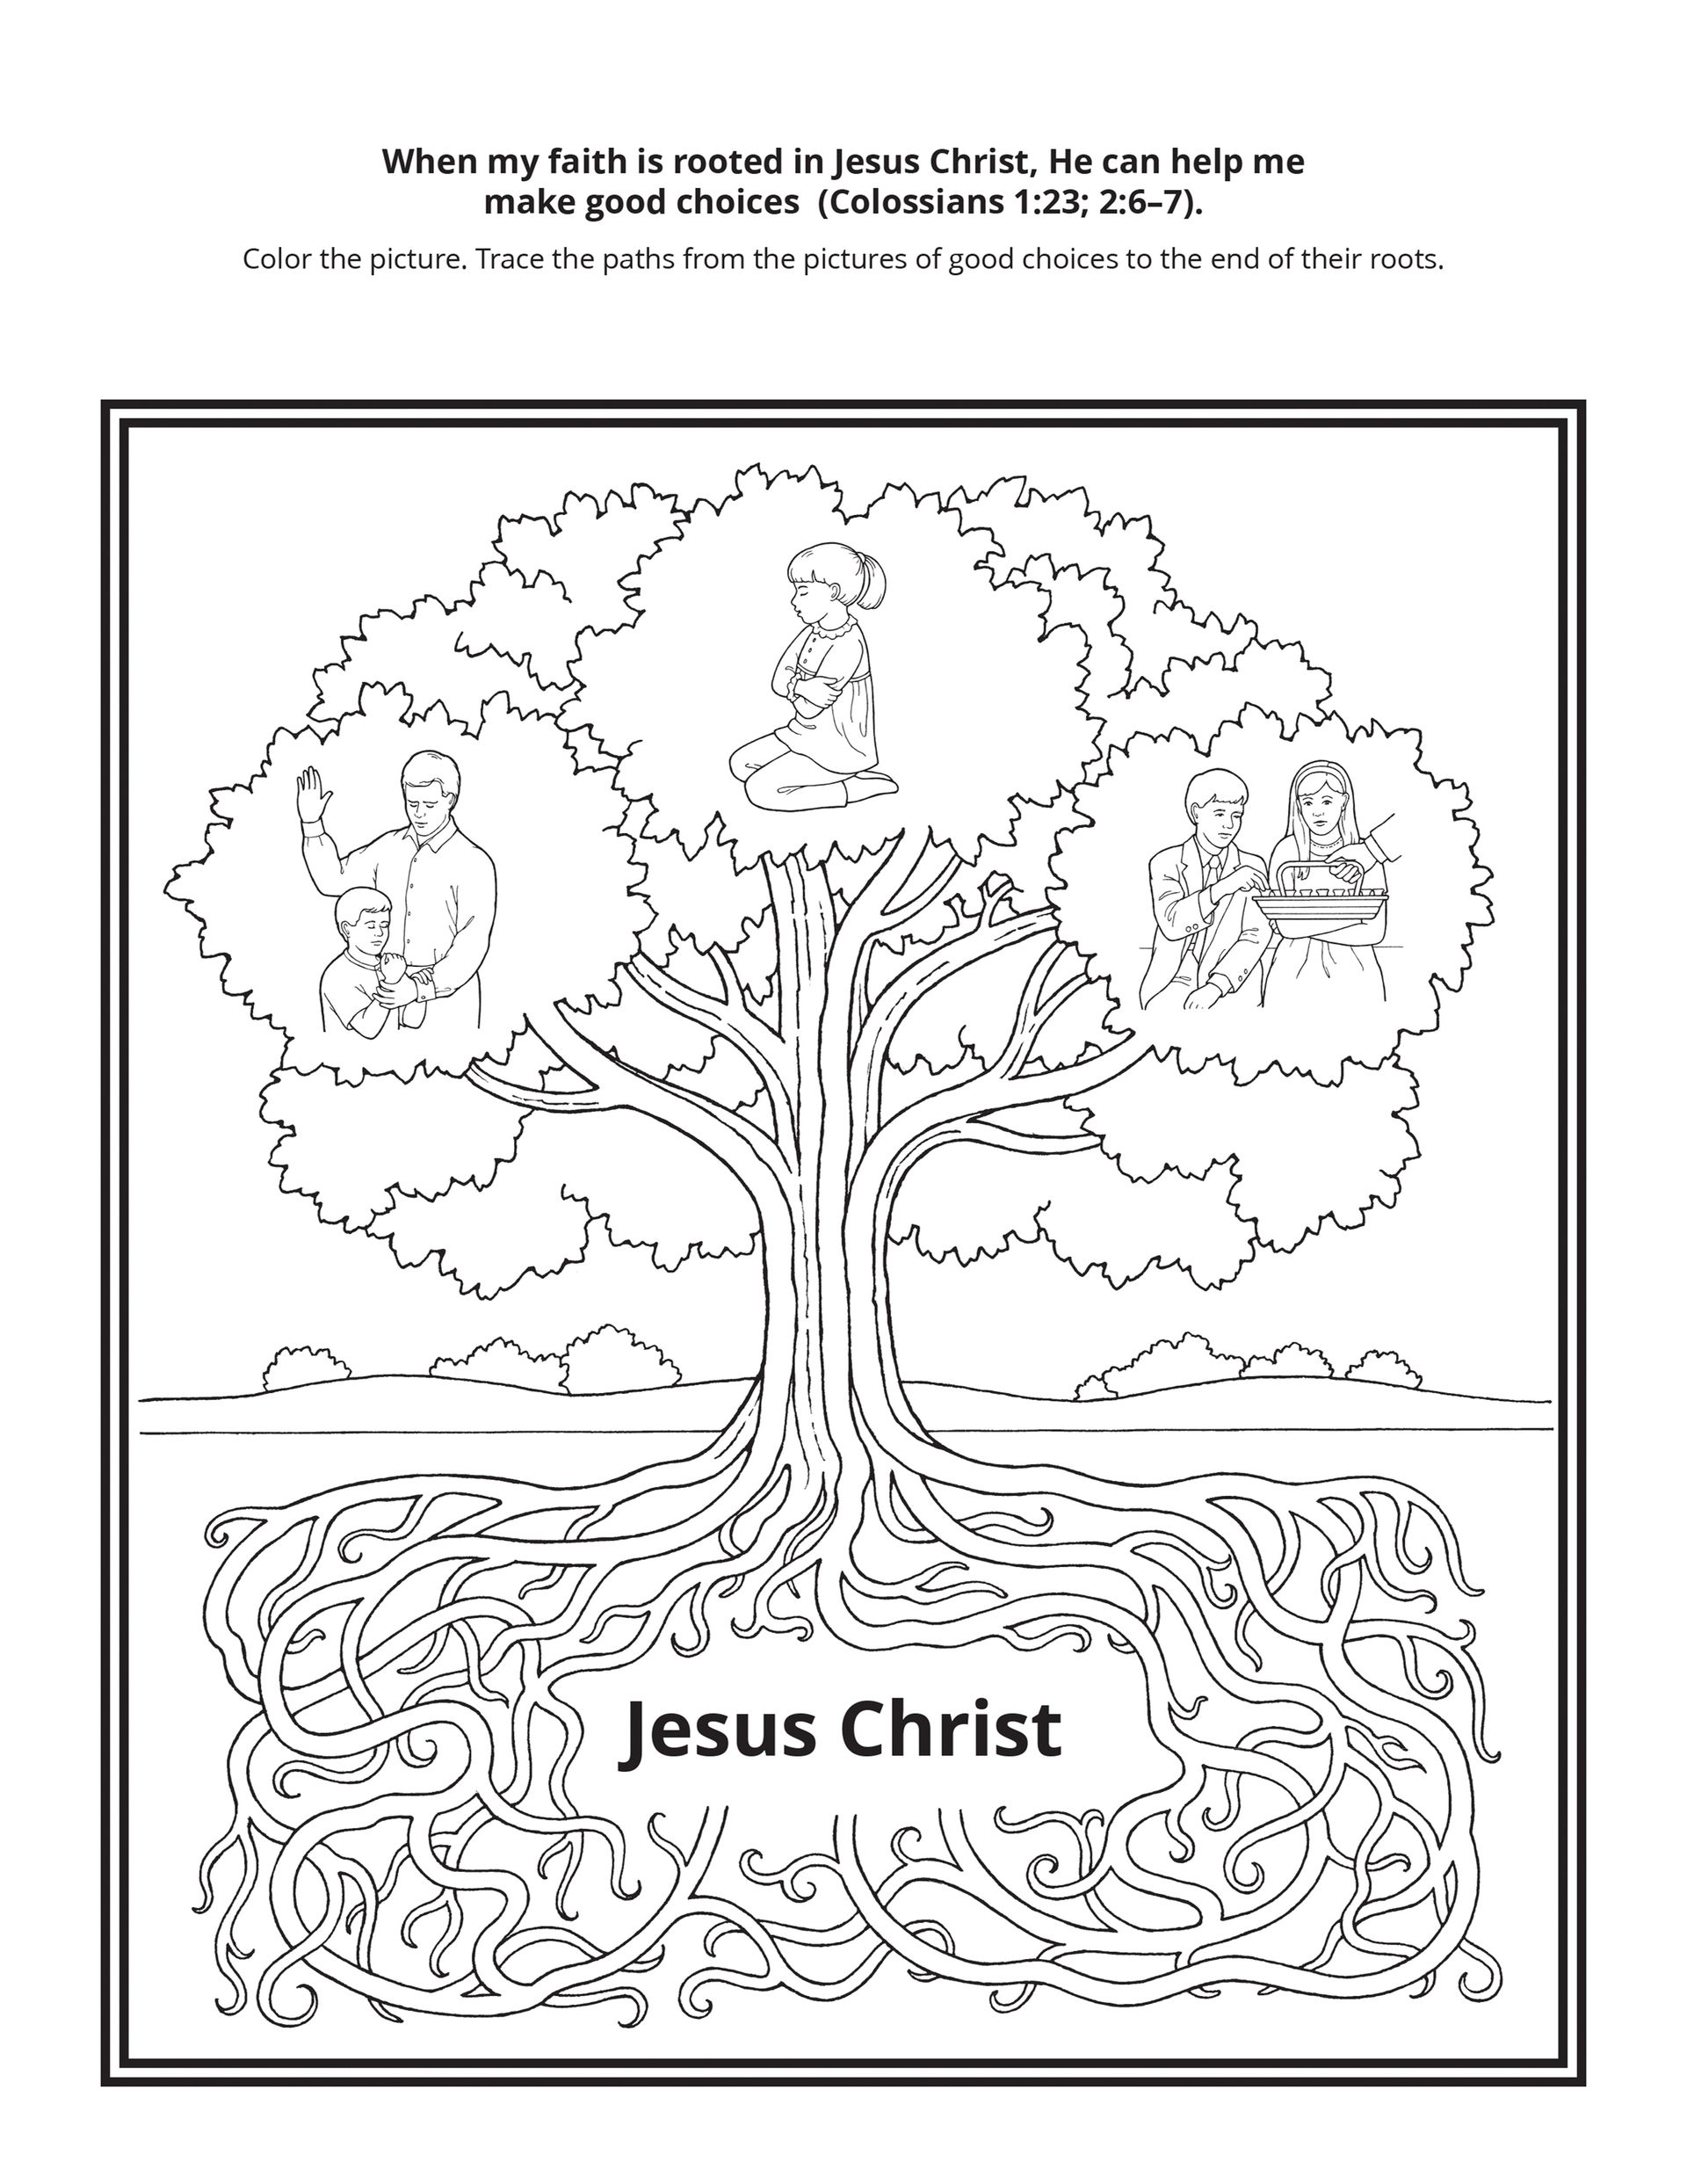 An illustration of a tree with images of prayer, baptism, and the sacrament.